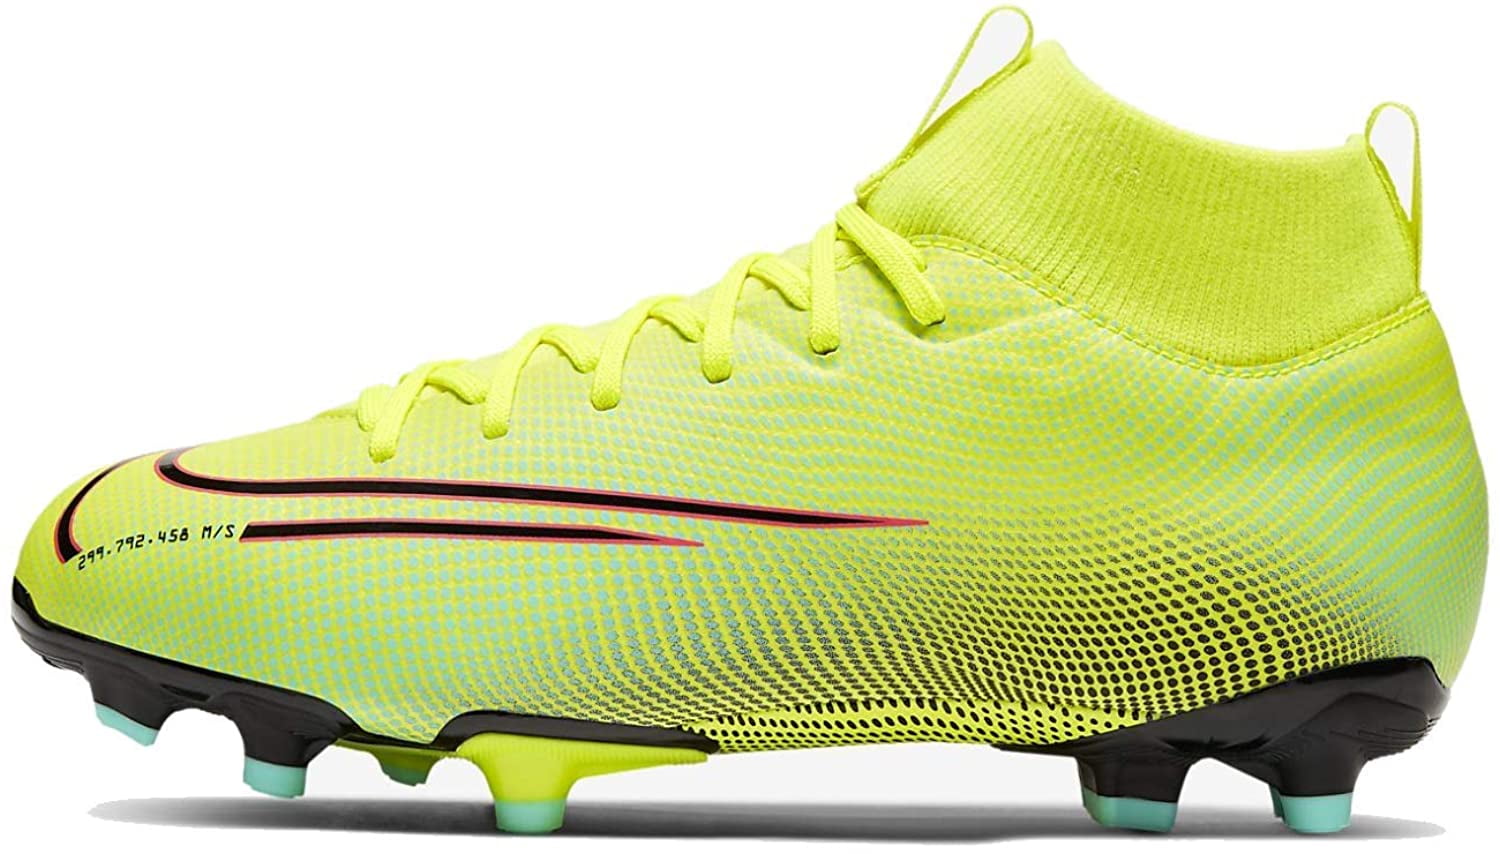 Nike Youth Mercurial Superfly 7 Academy MDS MG Cleats (Giallo Fluo, Numeric_4) Yellow | Walmart 